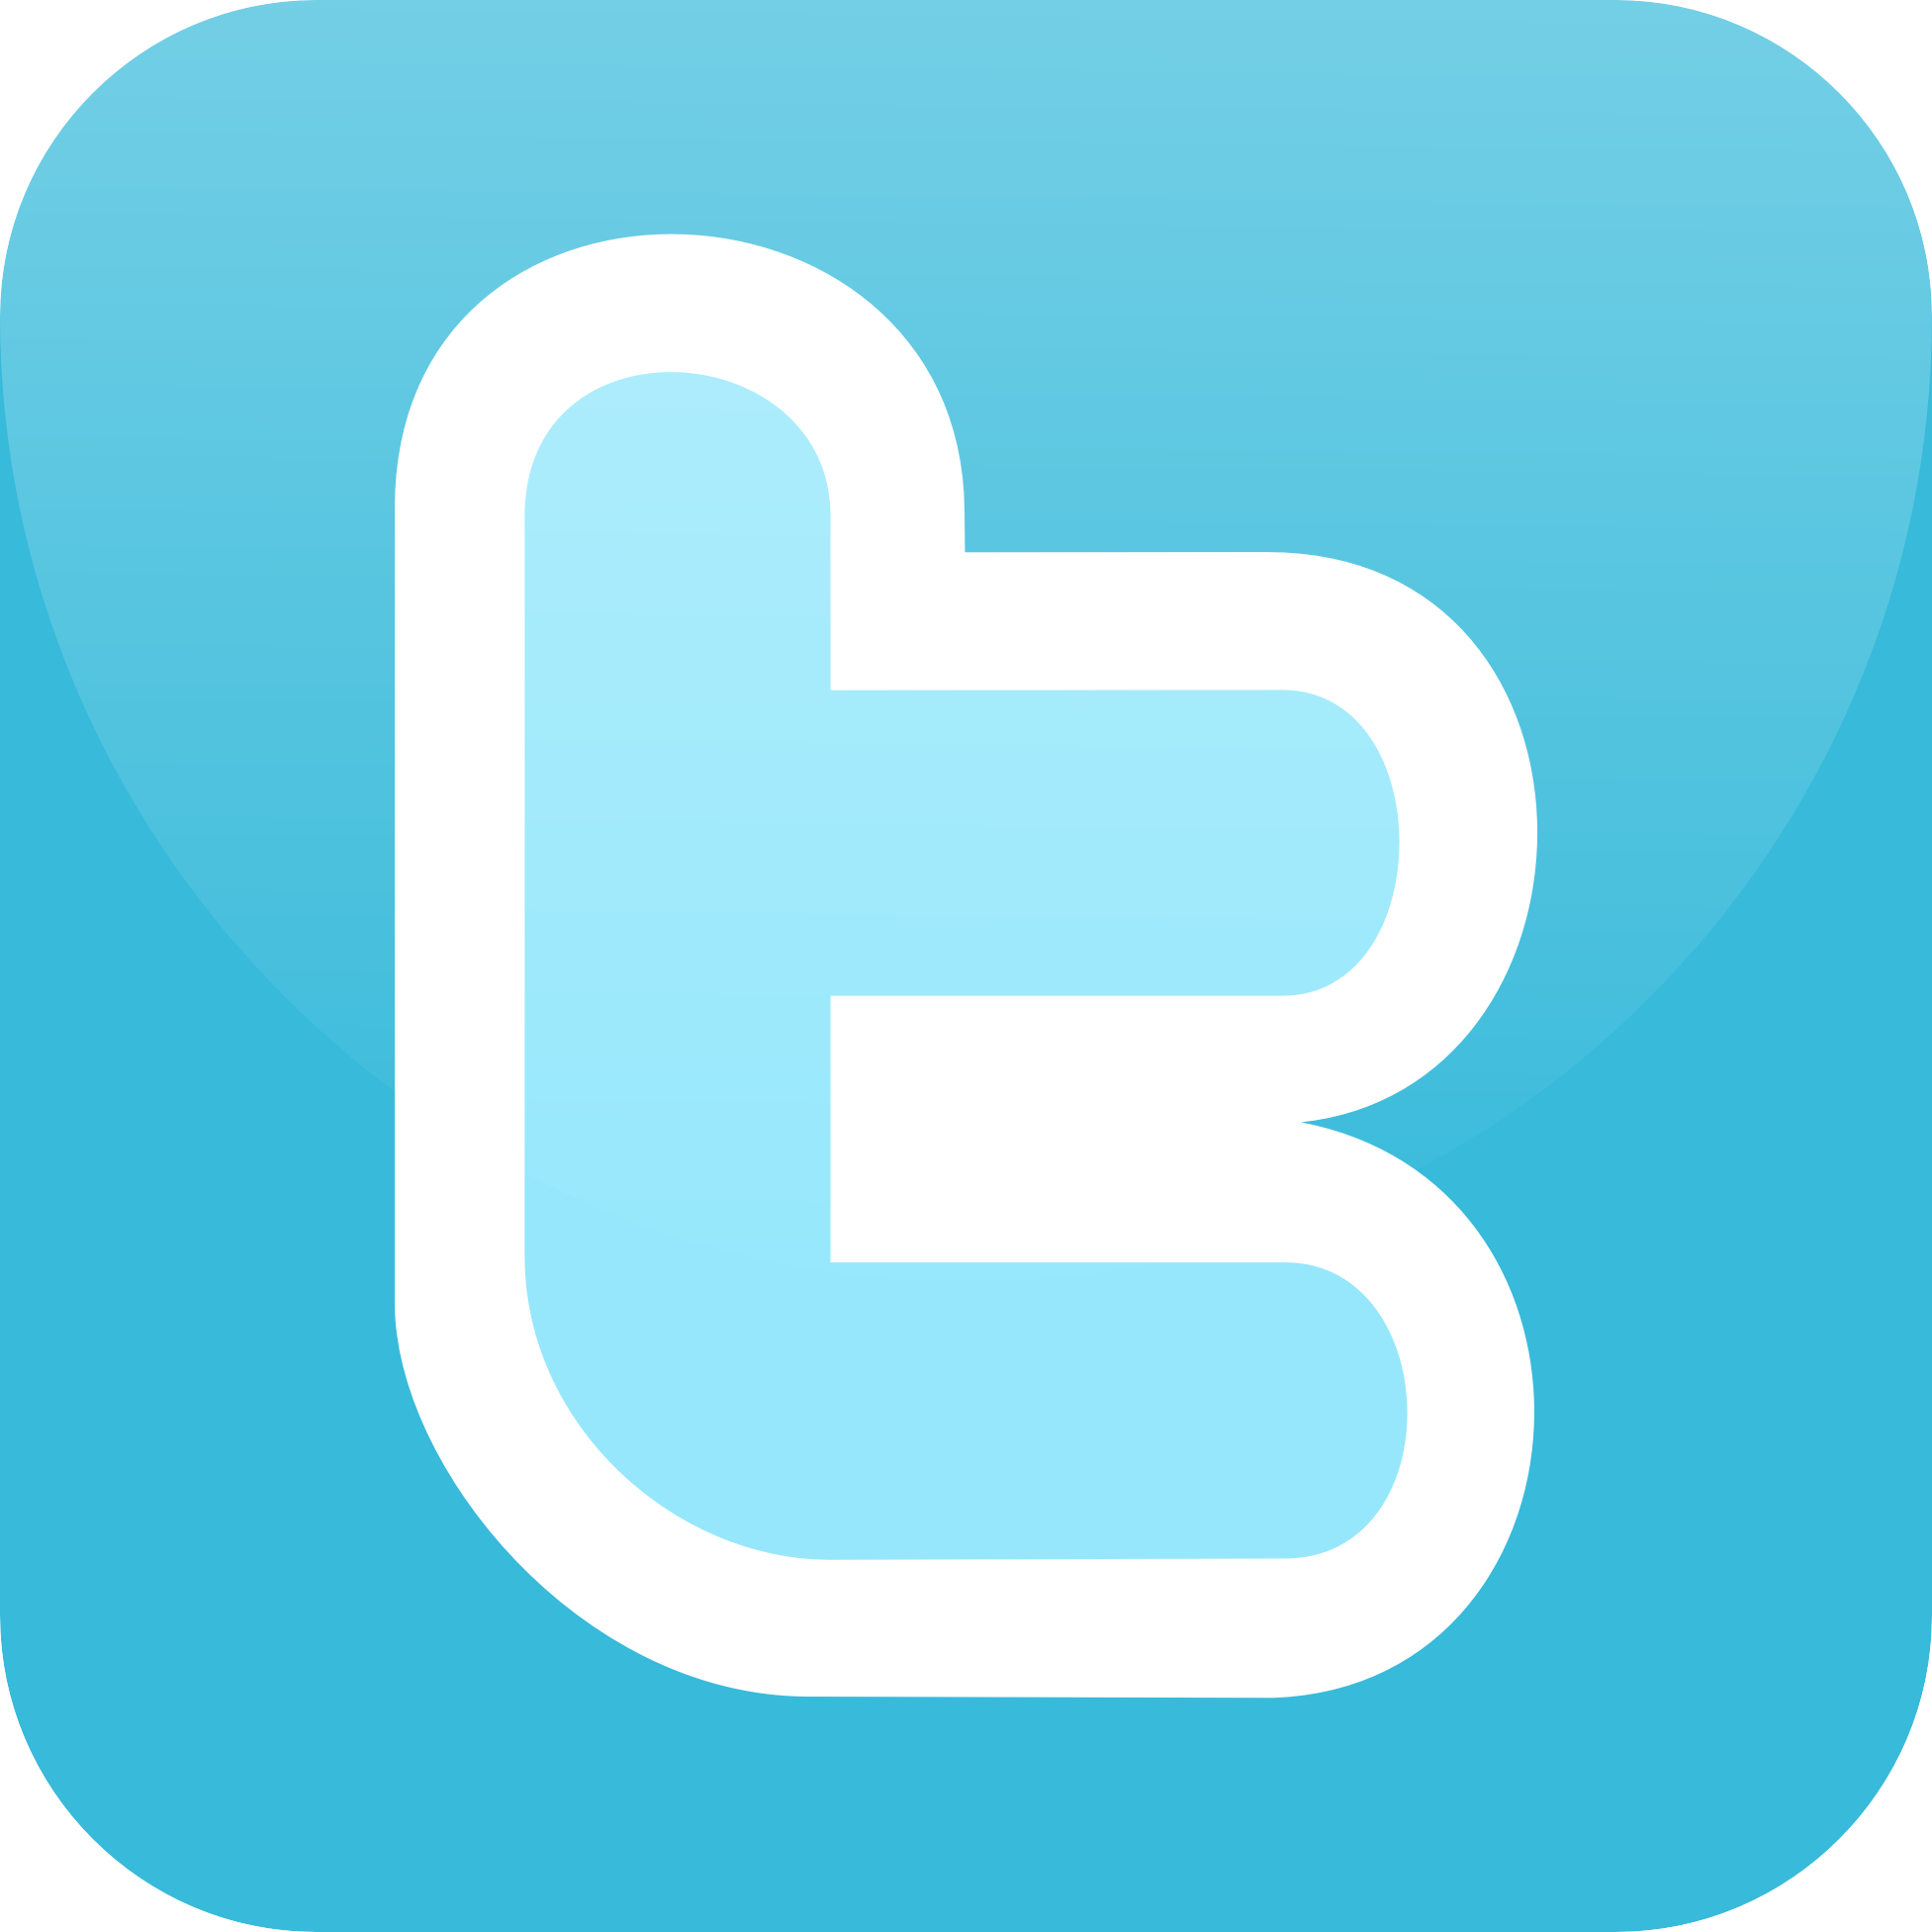 Download PNG image - Twitter PNG Free Download 